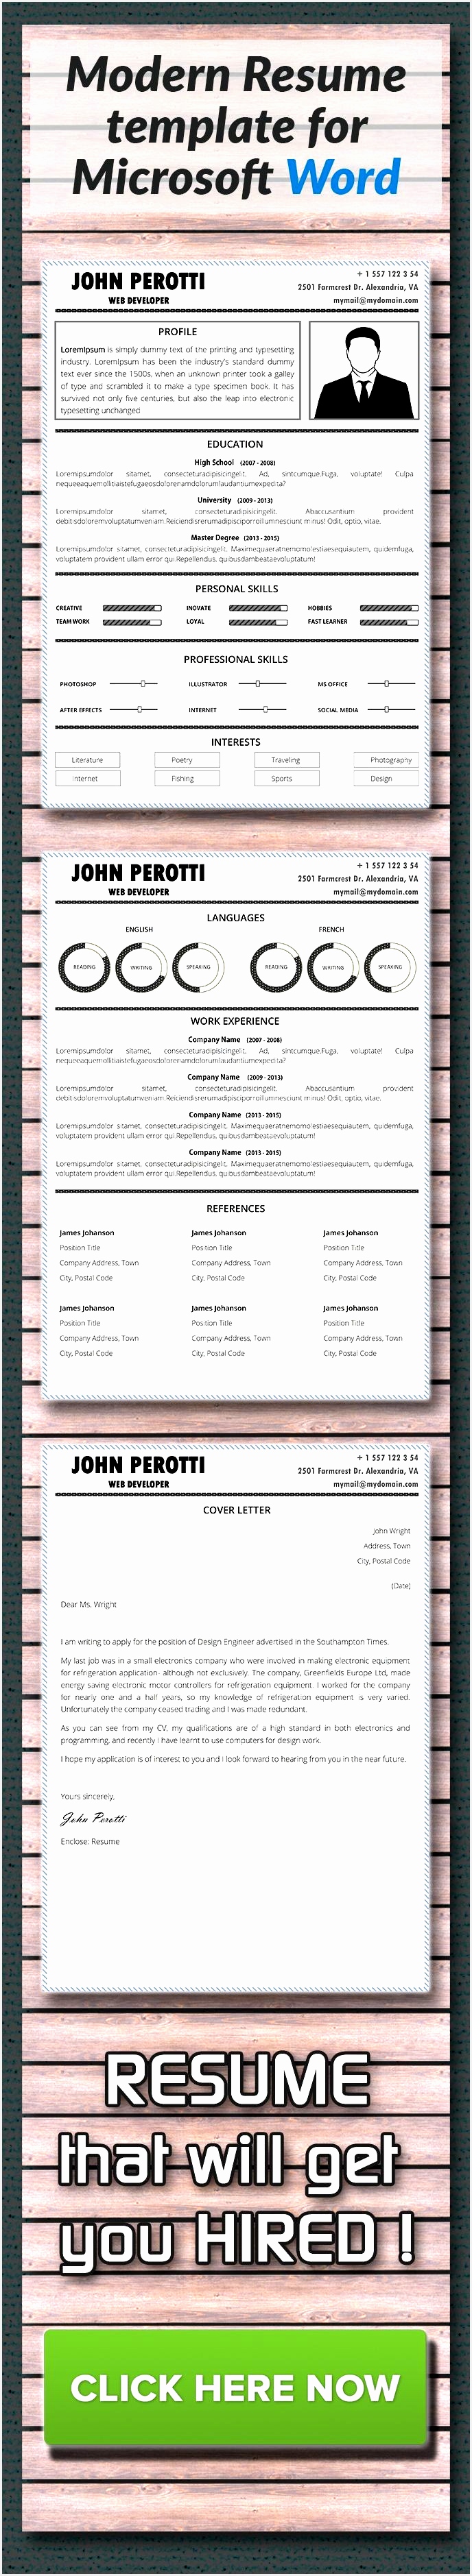 Awesome 35 Best Cv Resume Templates In Ms Word Pinterest Interests Resume3758688